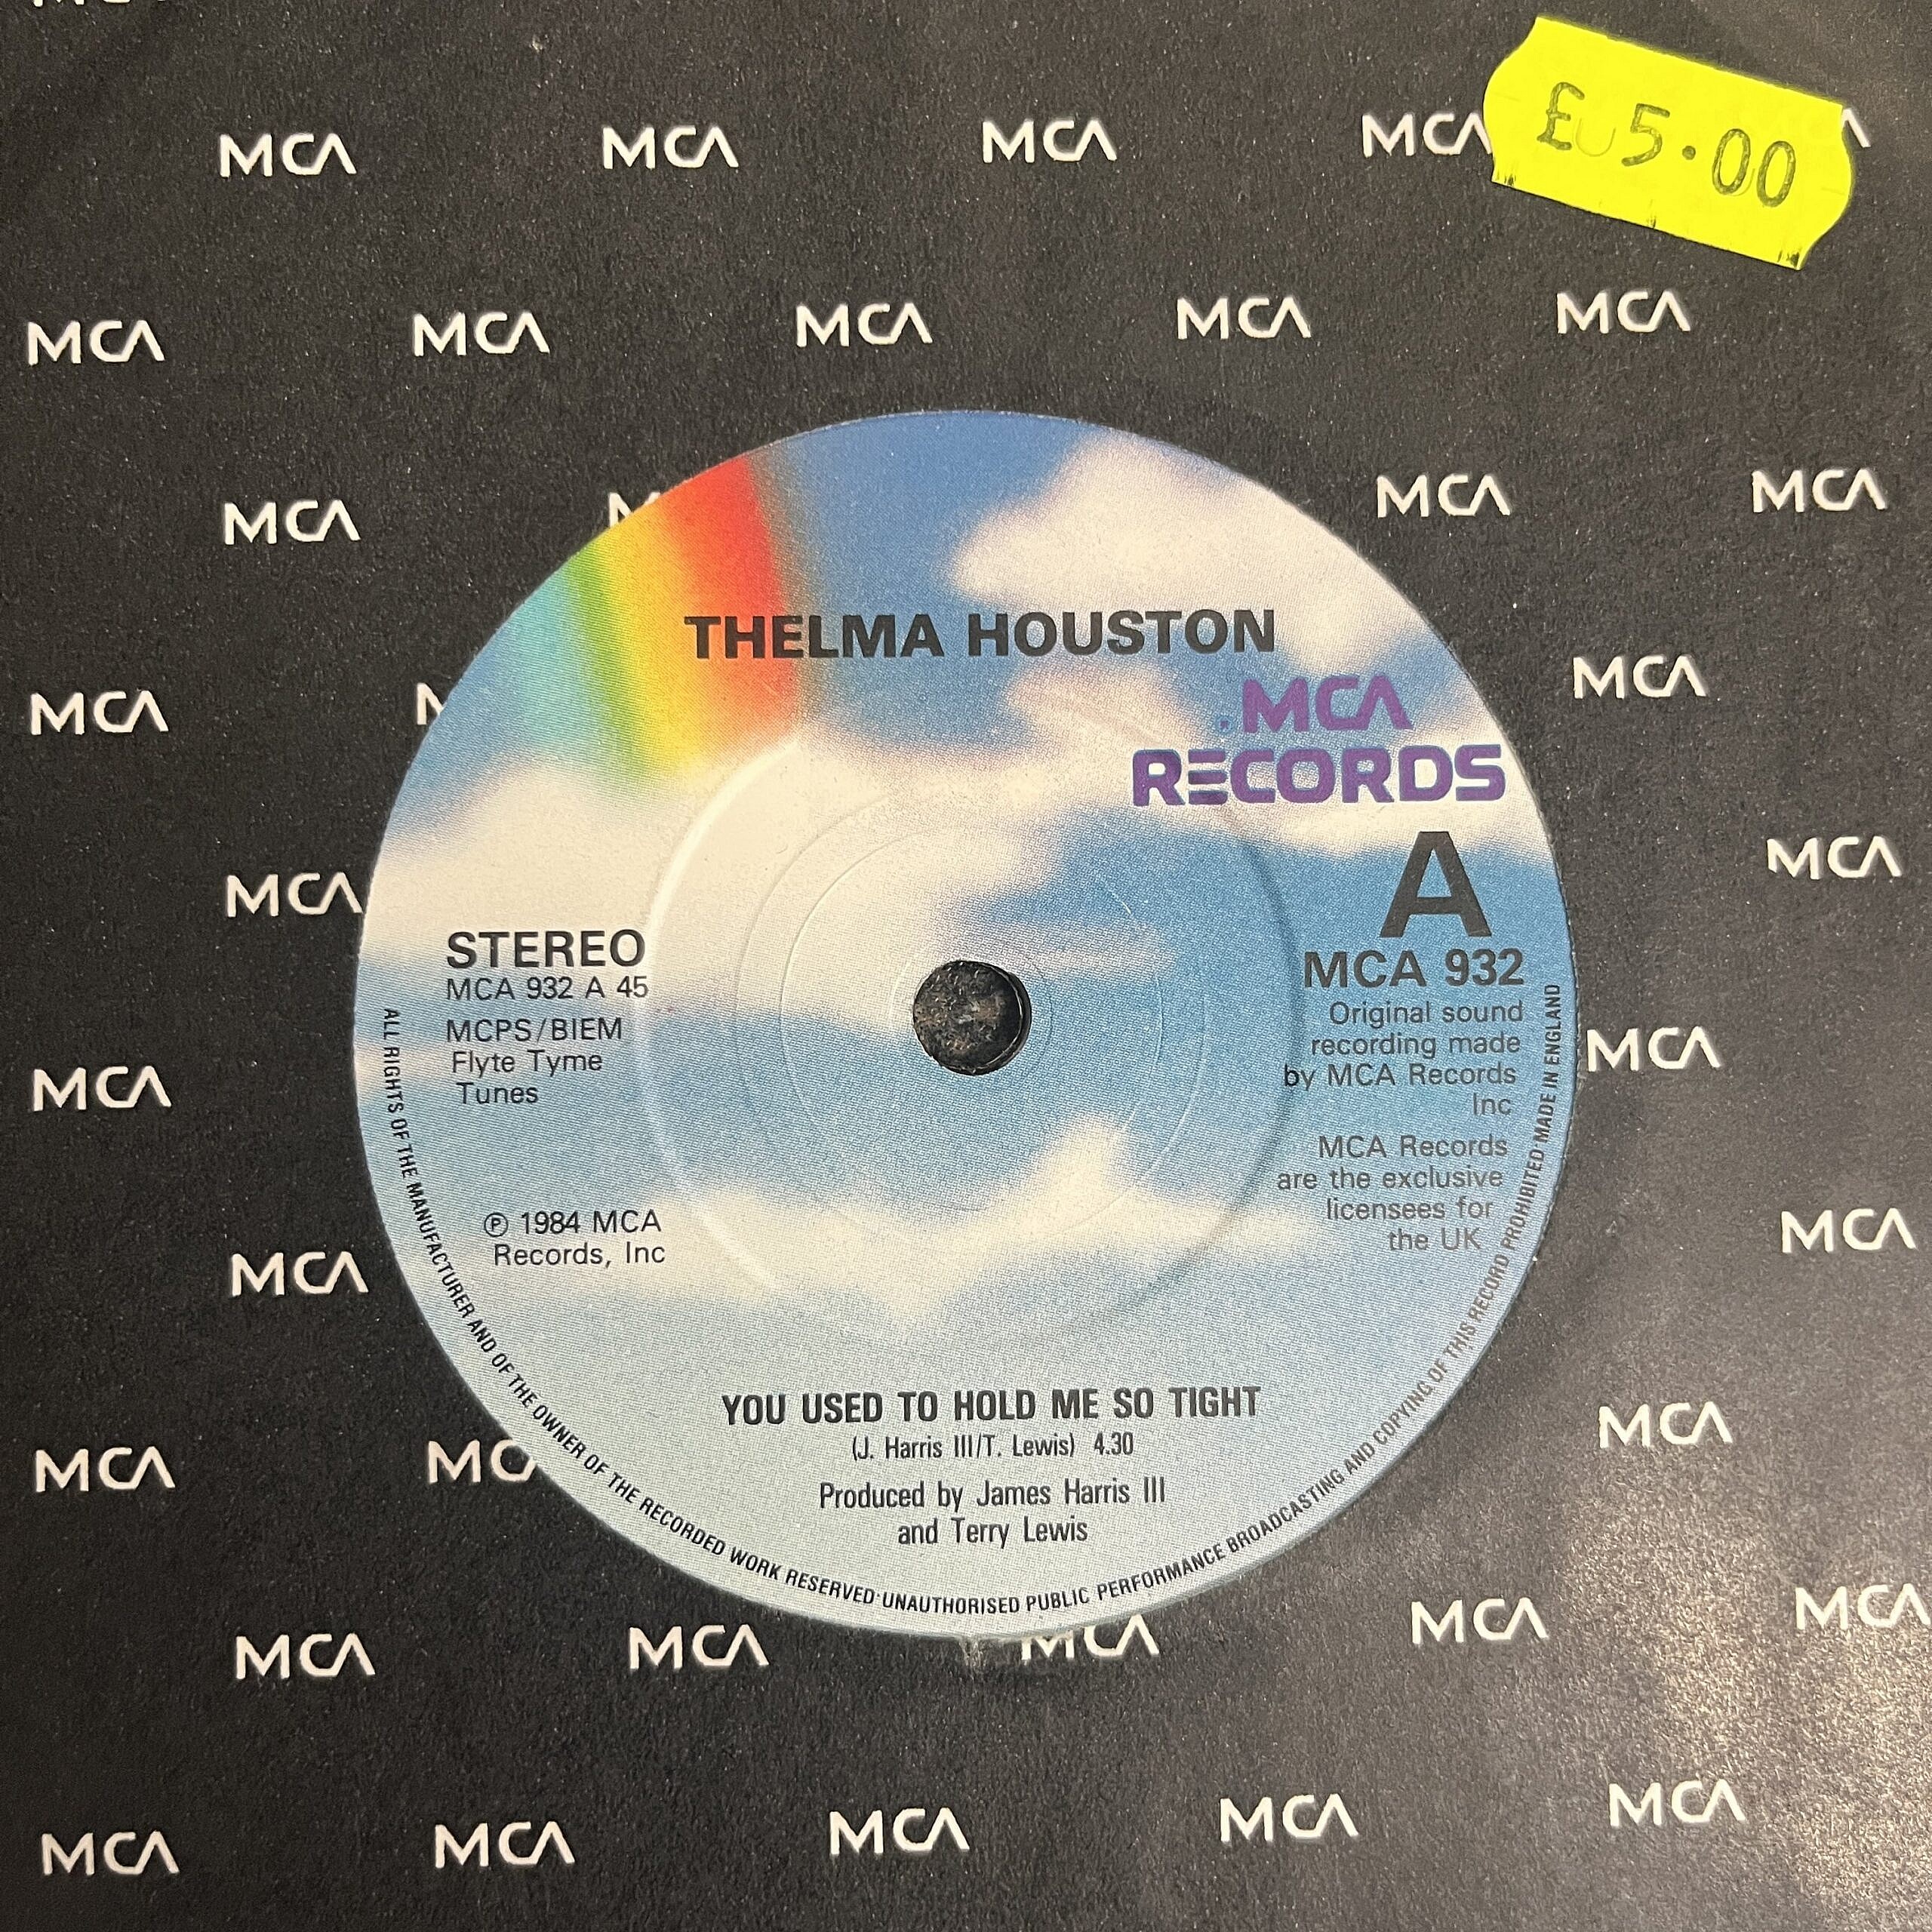 Thelma Houston - All Albums & Singles - Soul Brother Records